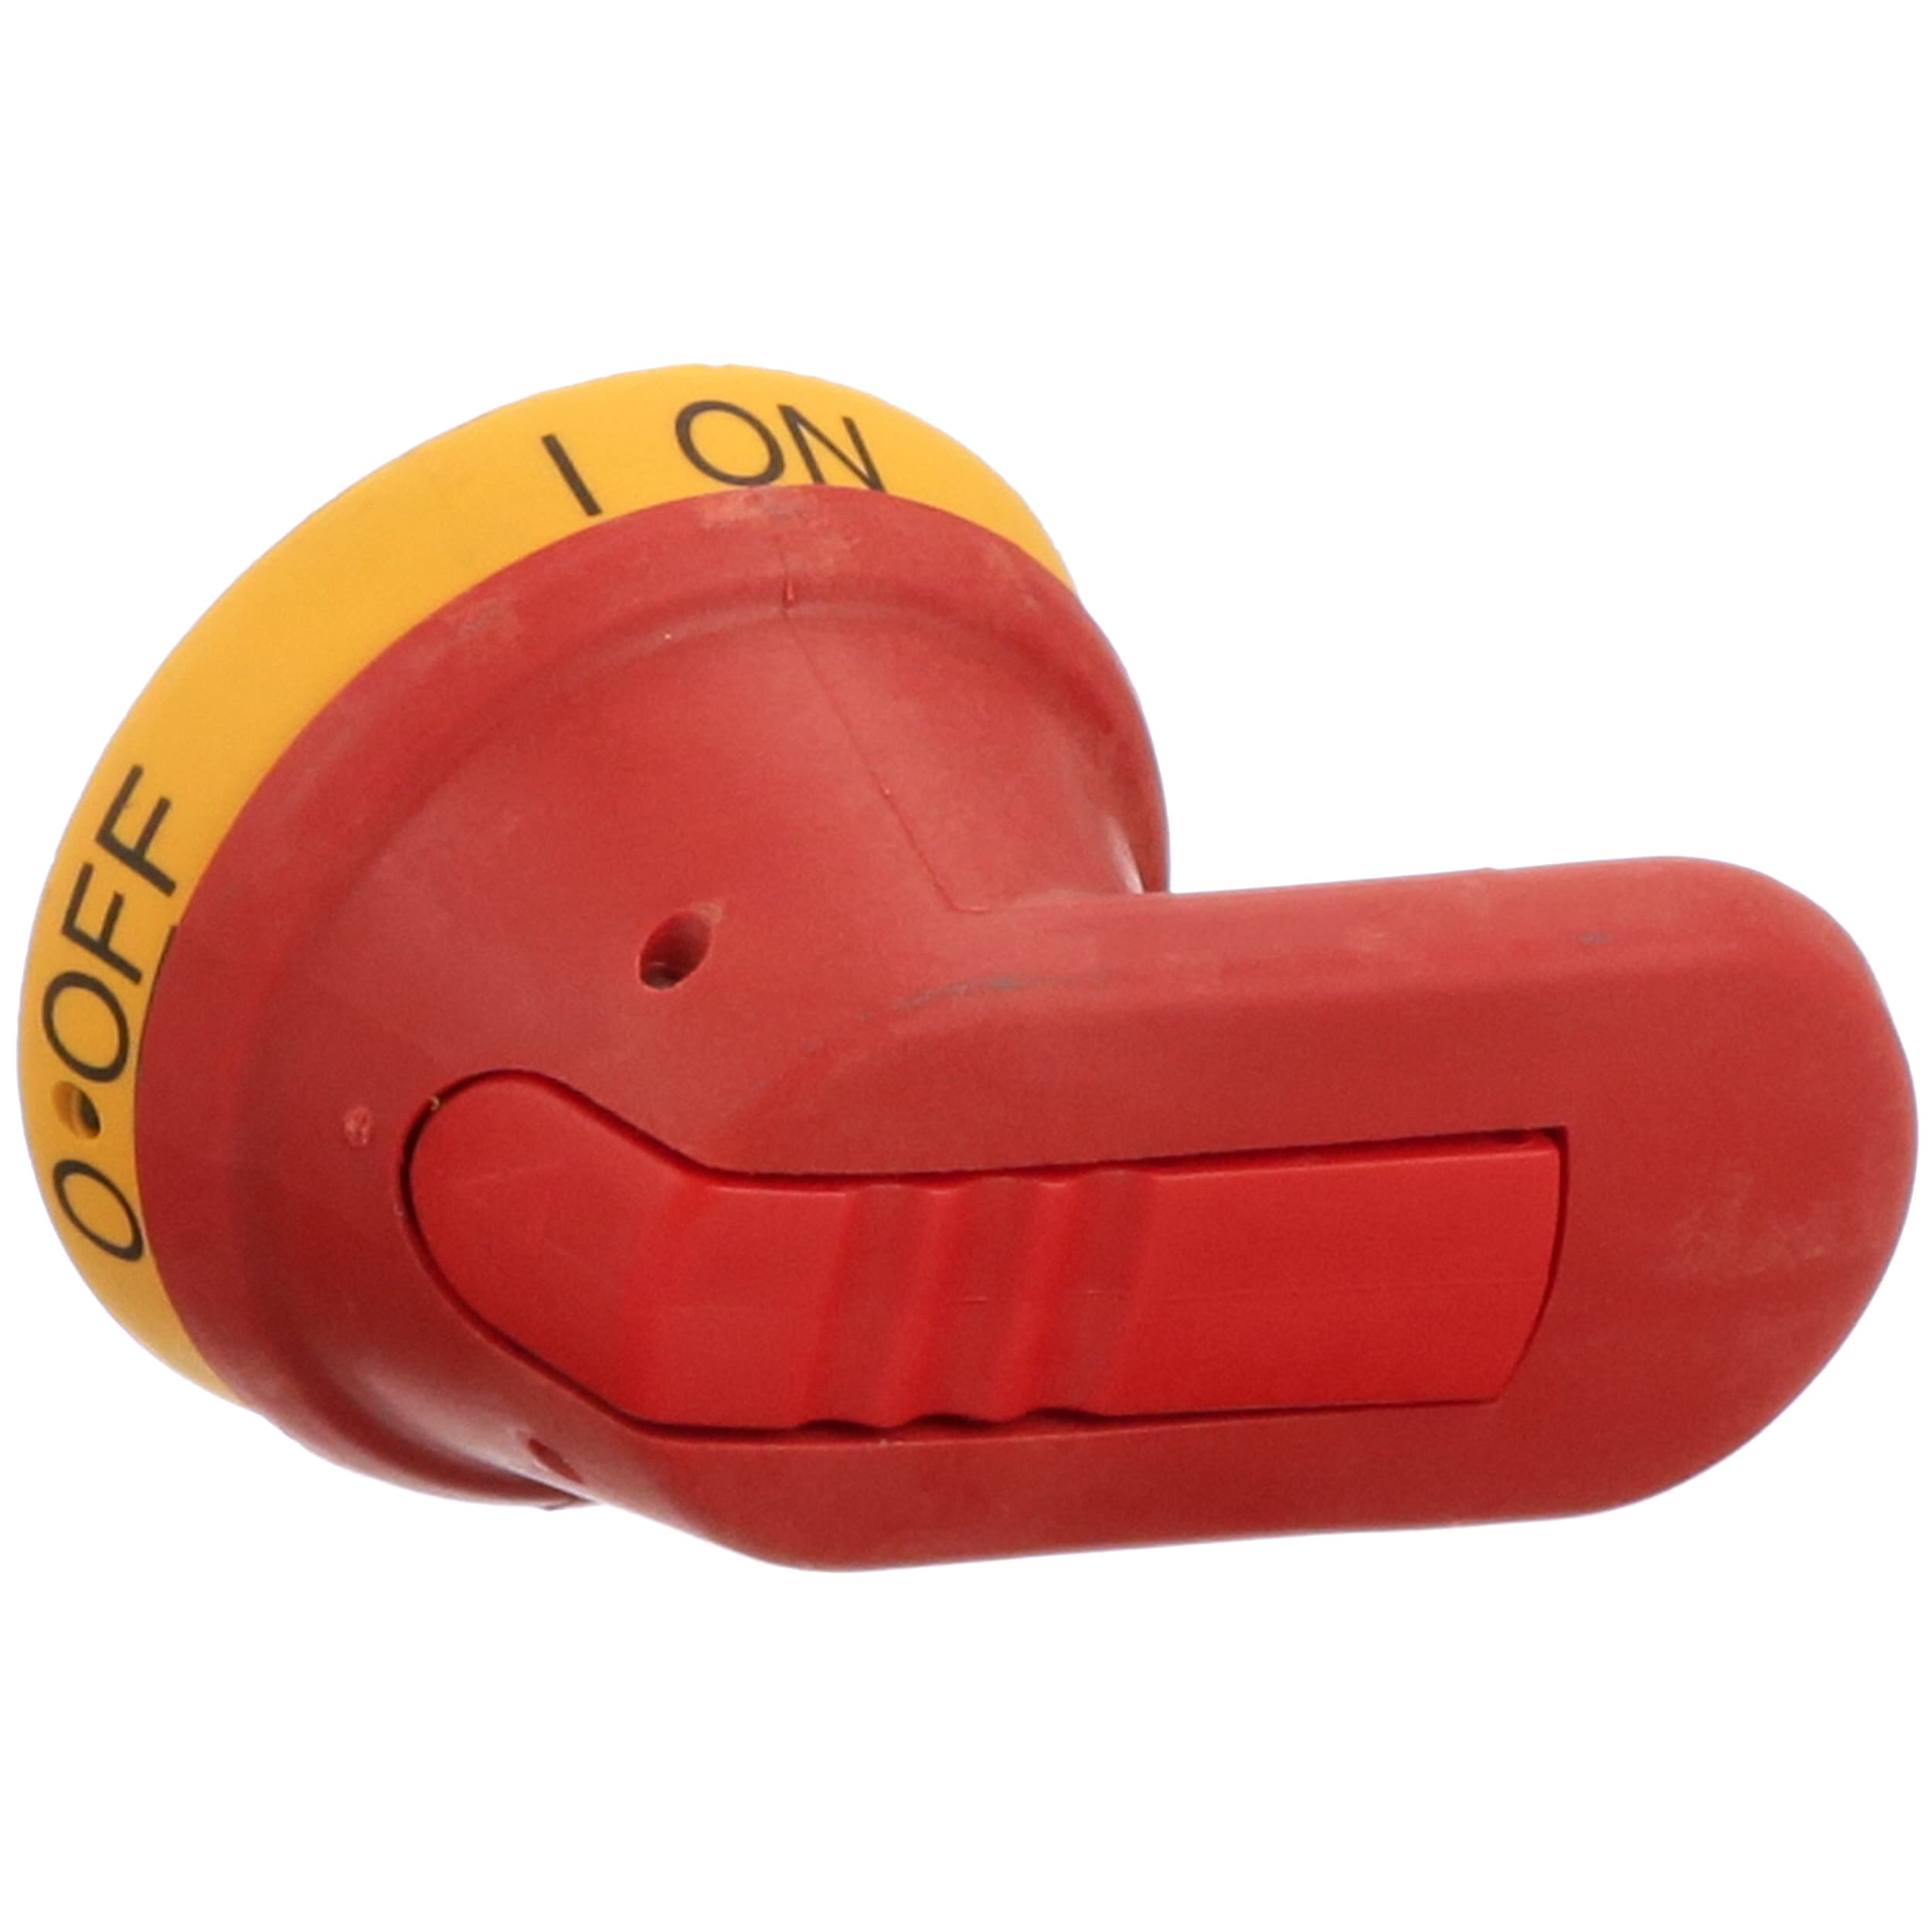 ABB OHY Pistol Handle Red/Yellow NEMA 3R/12 for Use with Disconnect Switches